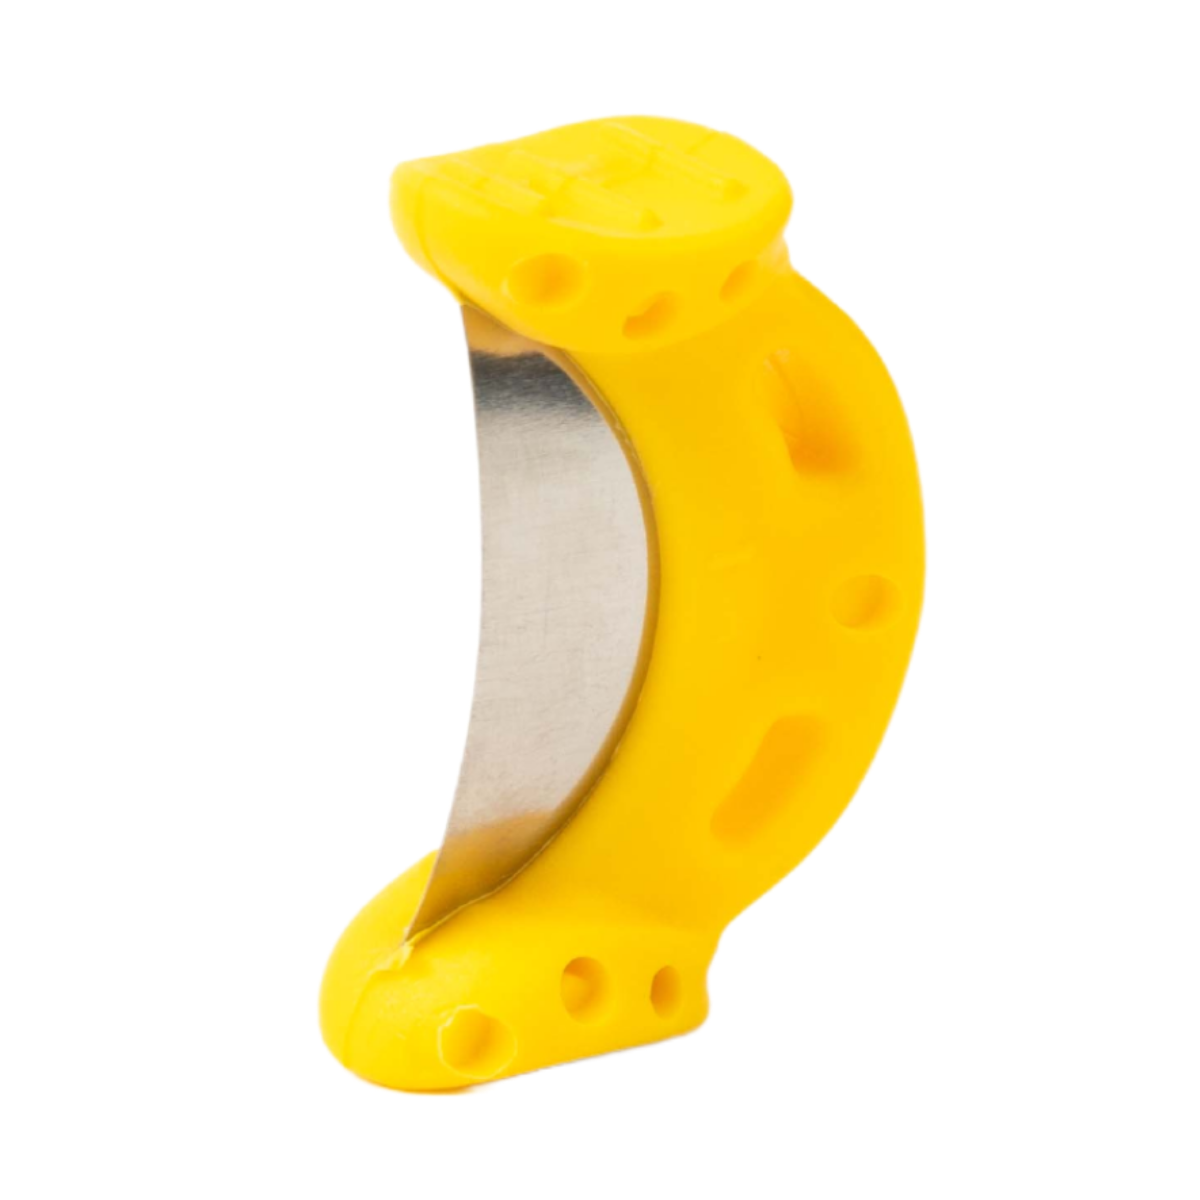 Curved yellow Qwikstrip